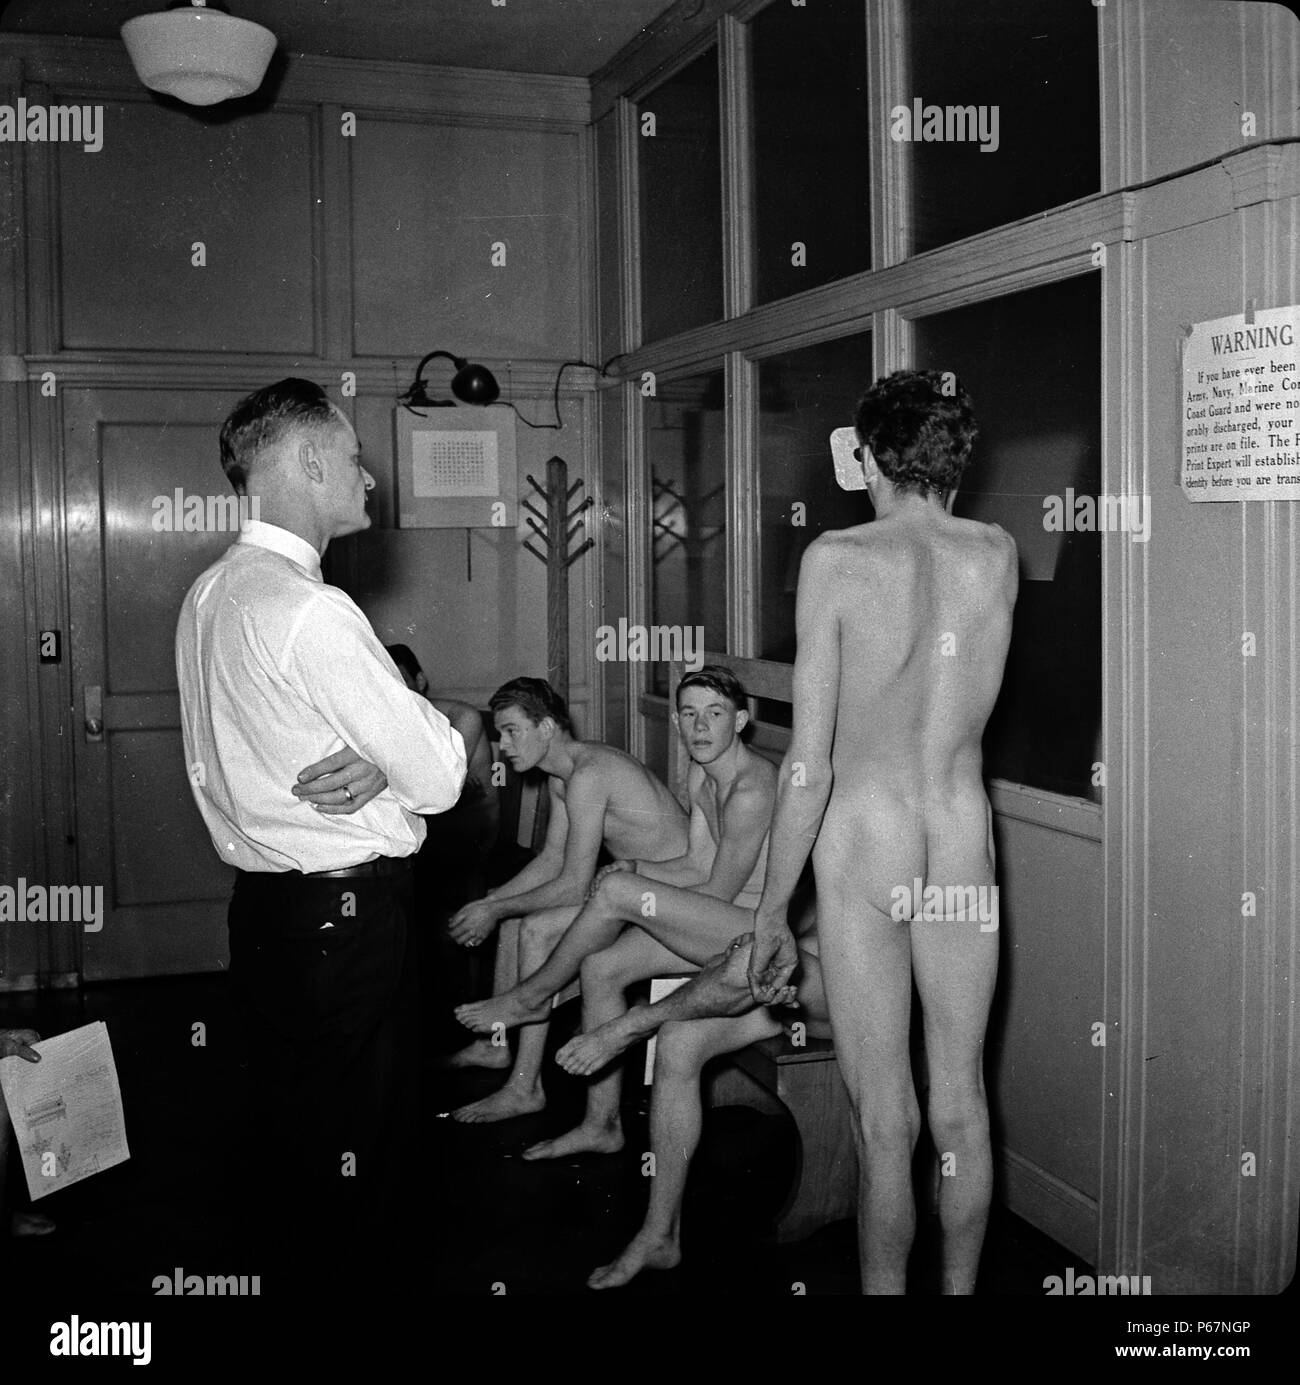 Image shows the Enlisting in the Marines, the recruits undergoing a medical and physical examination. San Francisco, California, taken in 1941. Stock Photo